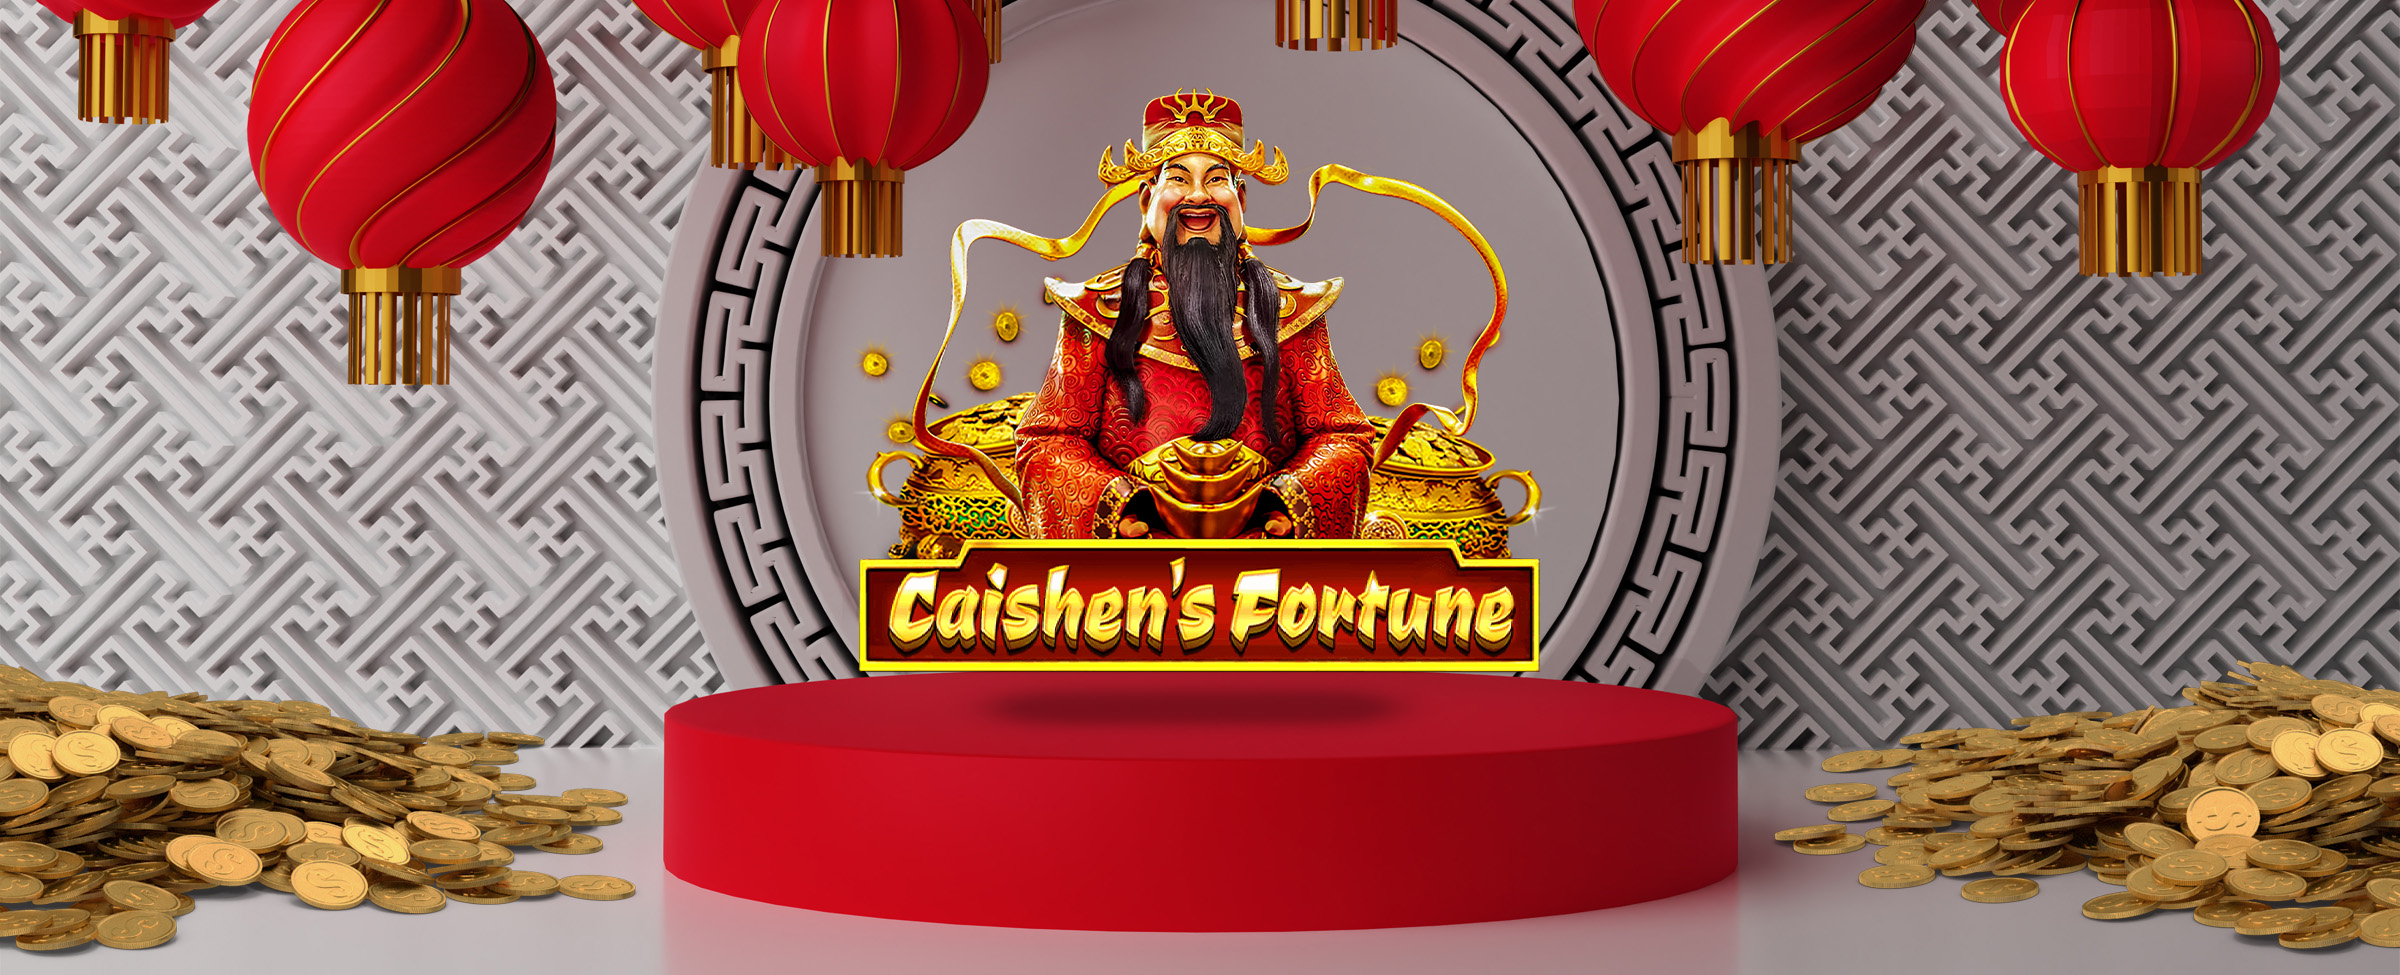 The logo from Cafe Casino’s slot game called Caishen’s Fortune XL hovers above a small red circular stage, flanked by piles of gold coins. Overhead, red lanterns hang, while in the background, a wall showing traditional Chinese patterns is seen.